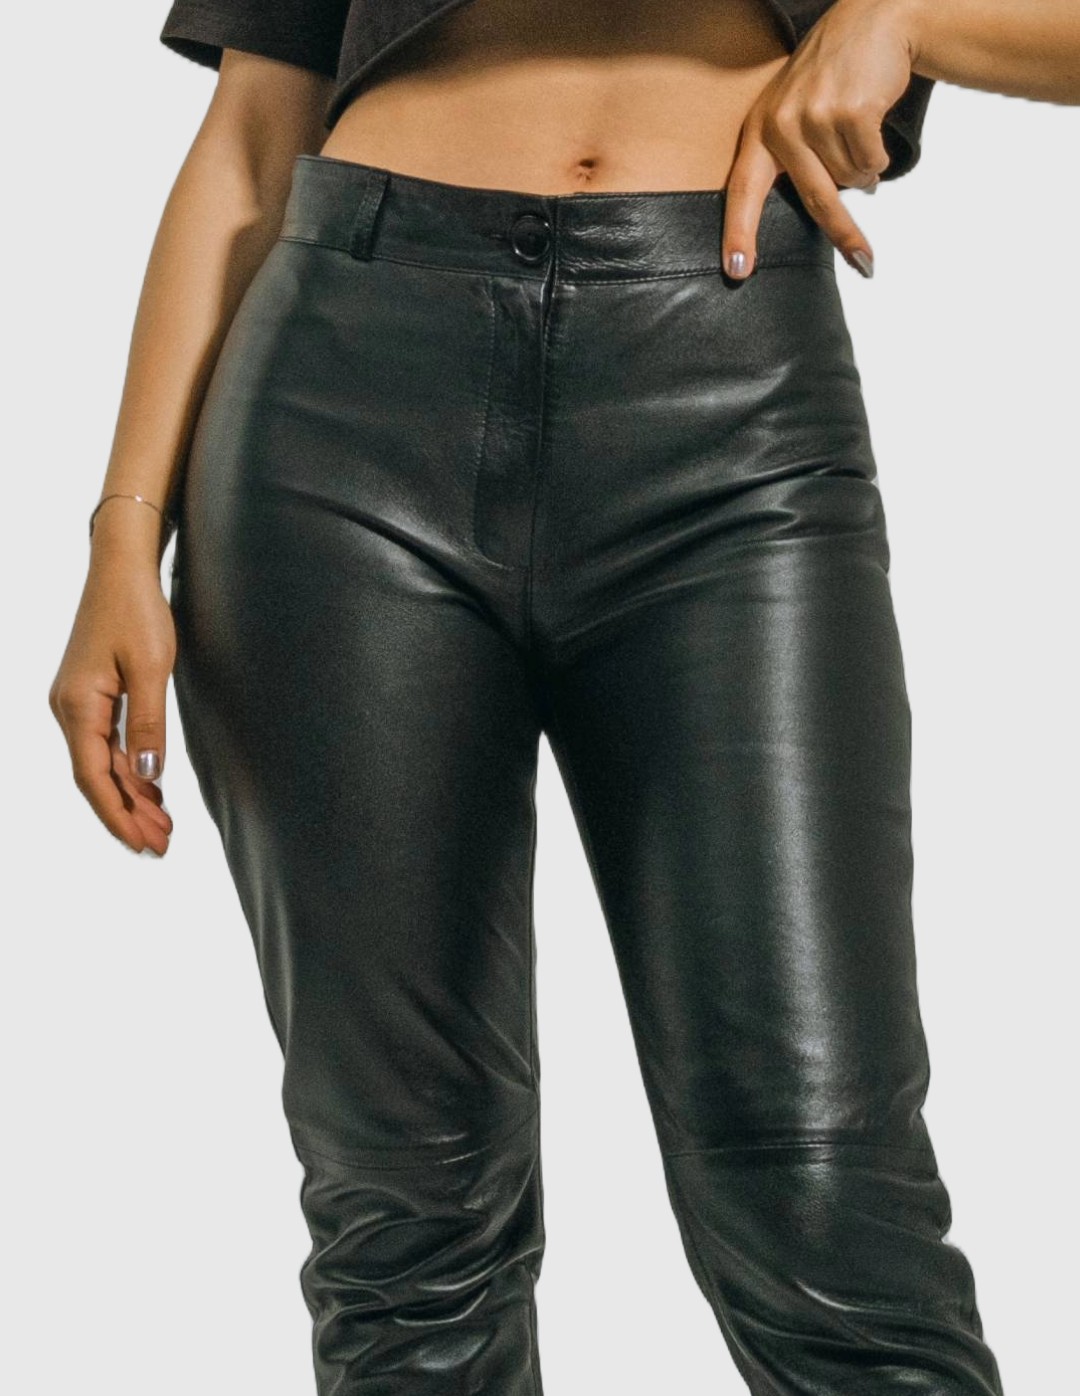 Perfect fit Leather Pants for Women Black Genuine Leather Leggings Adel